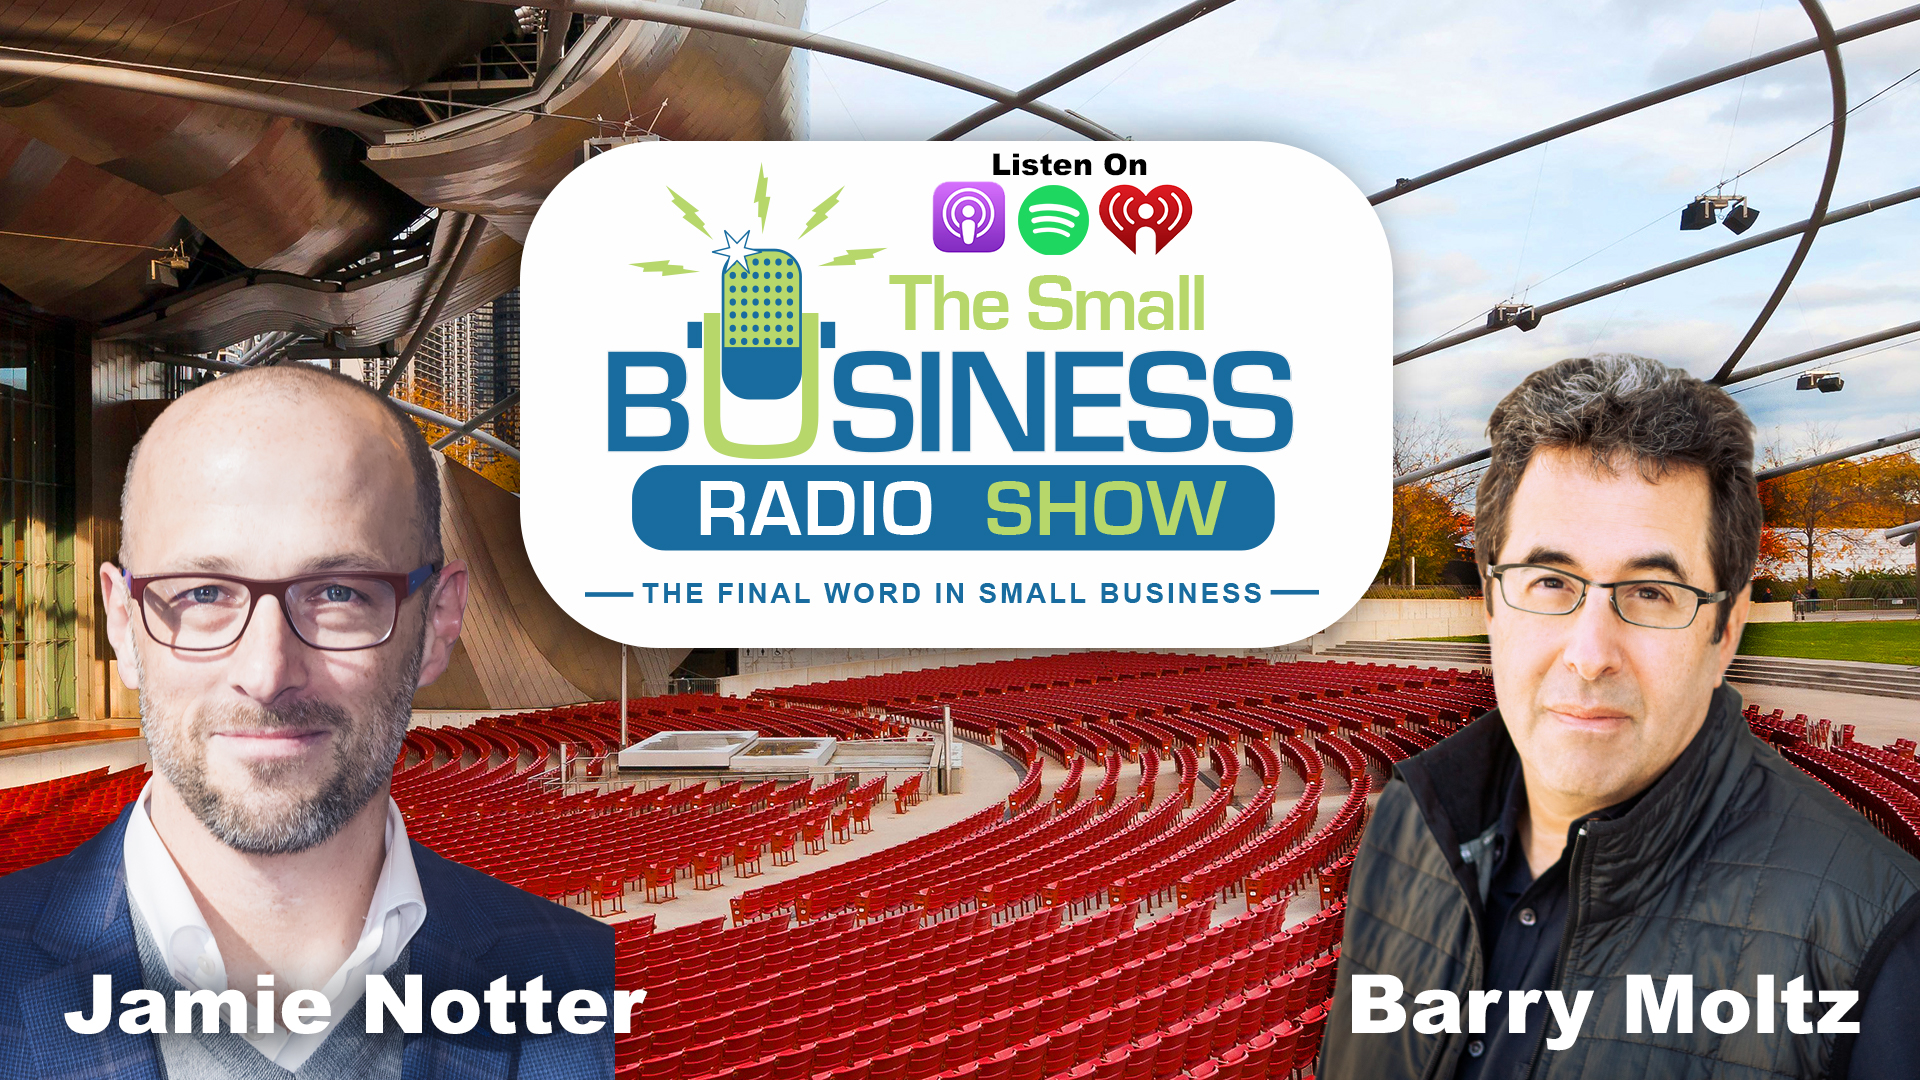 Jamie Notter on The Small Business Radio Show